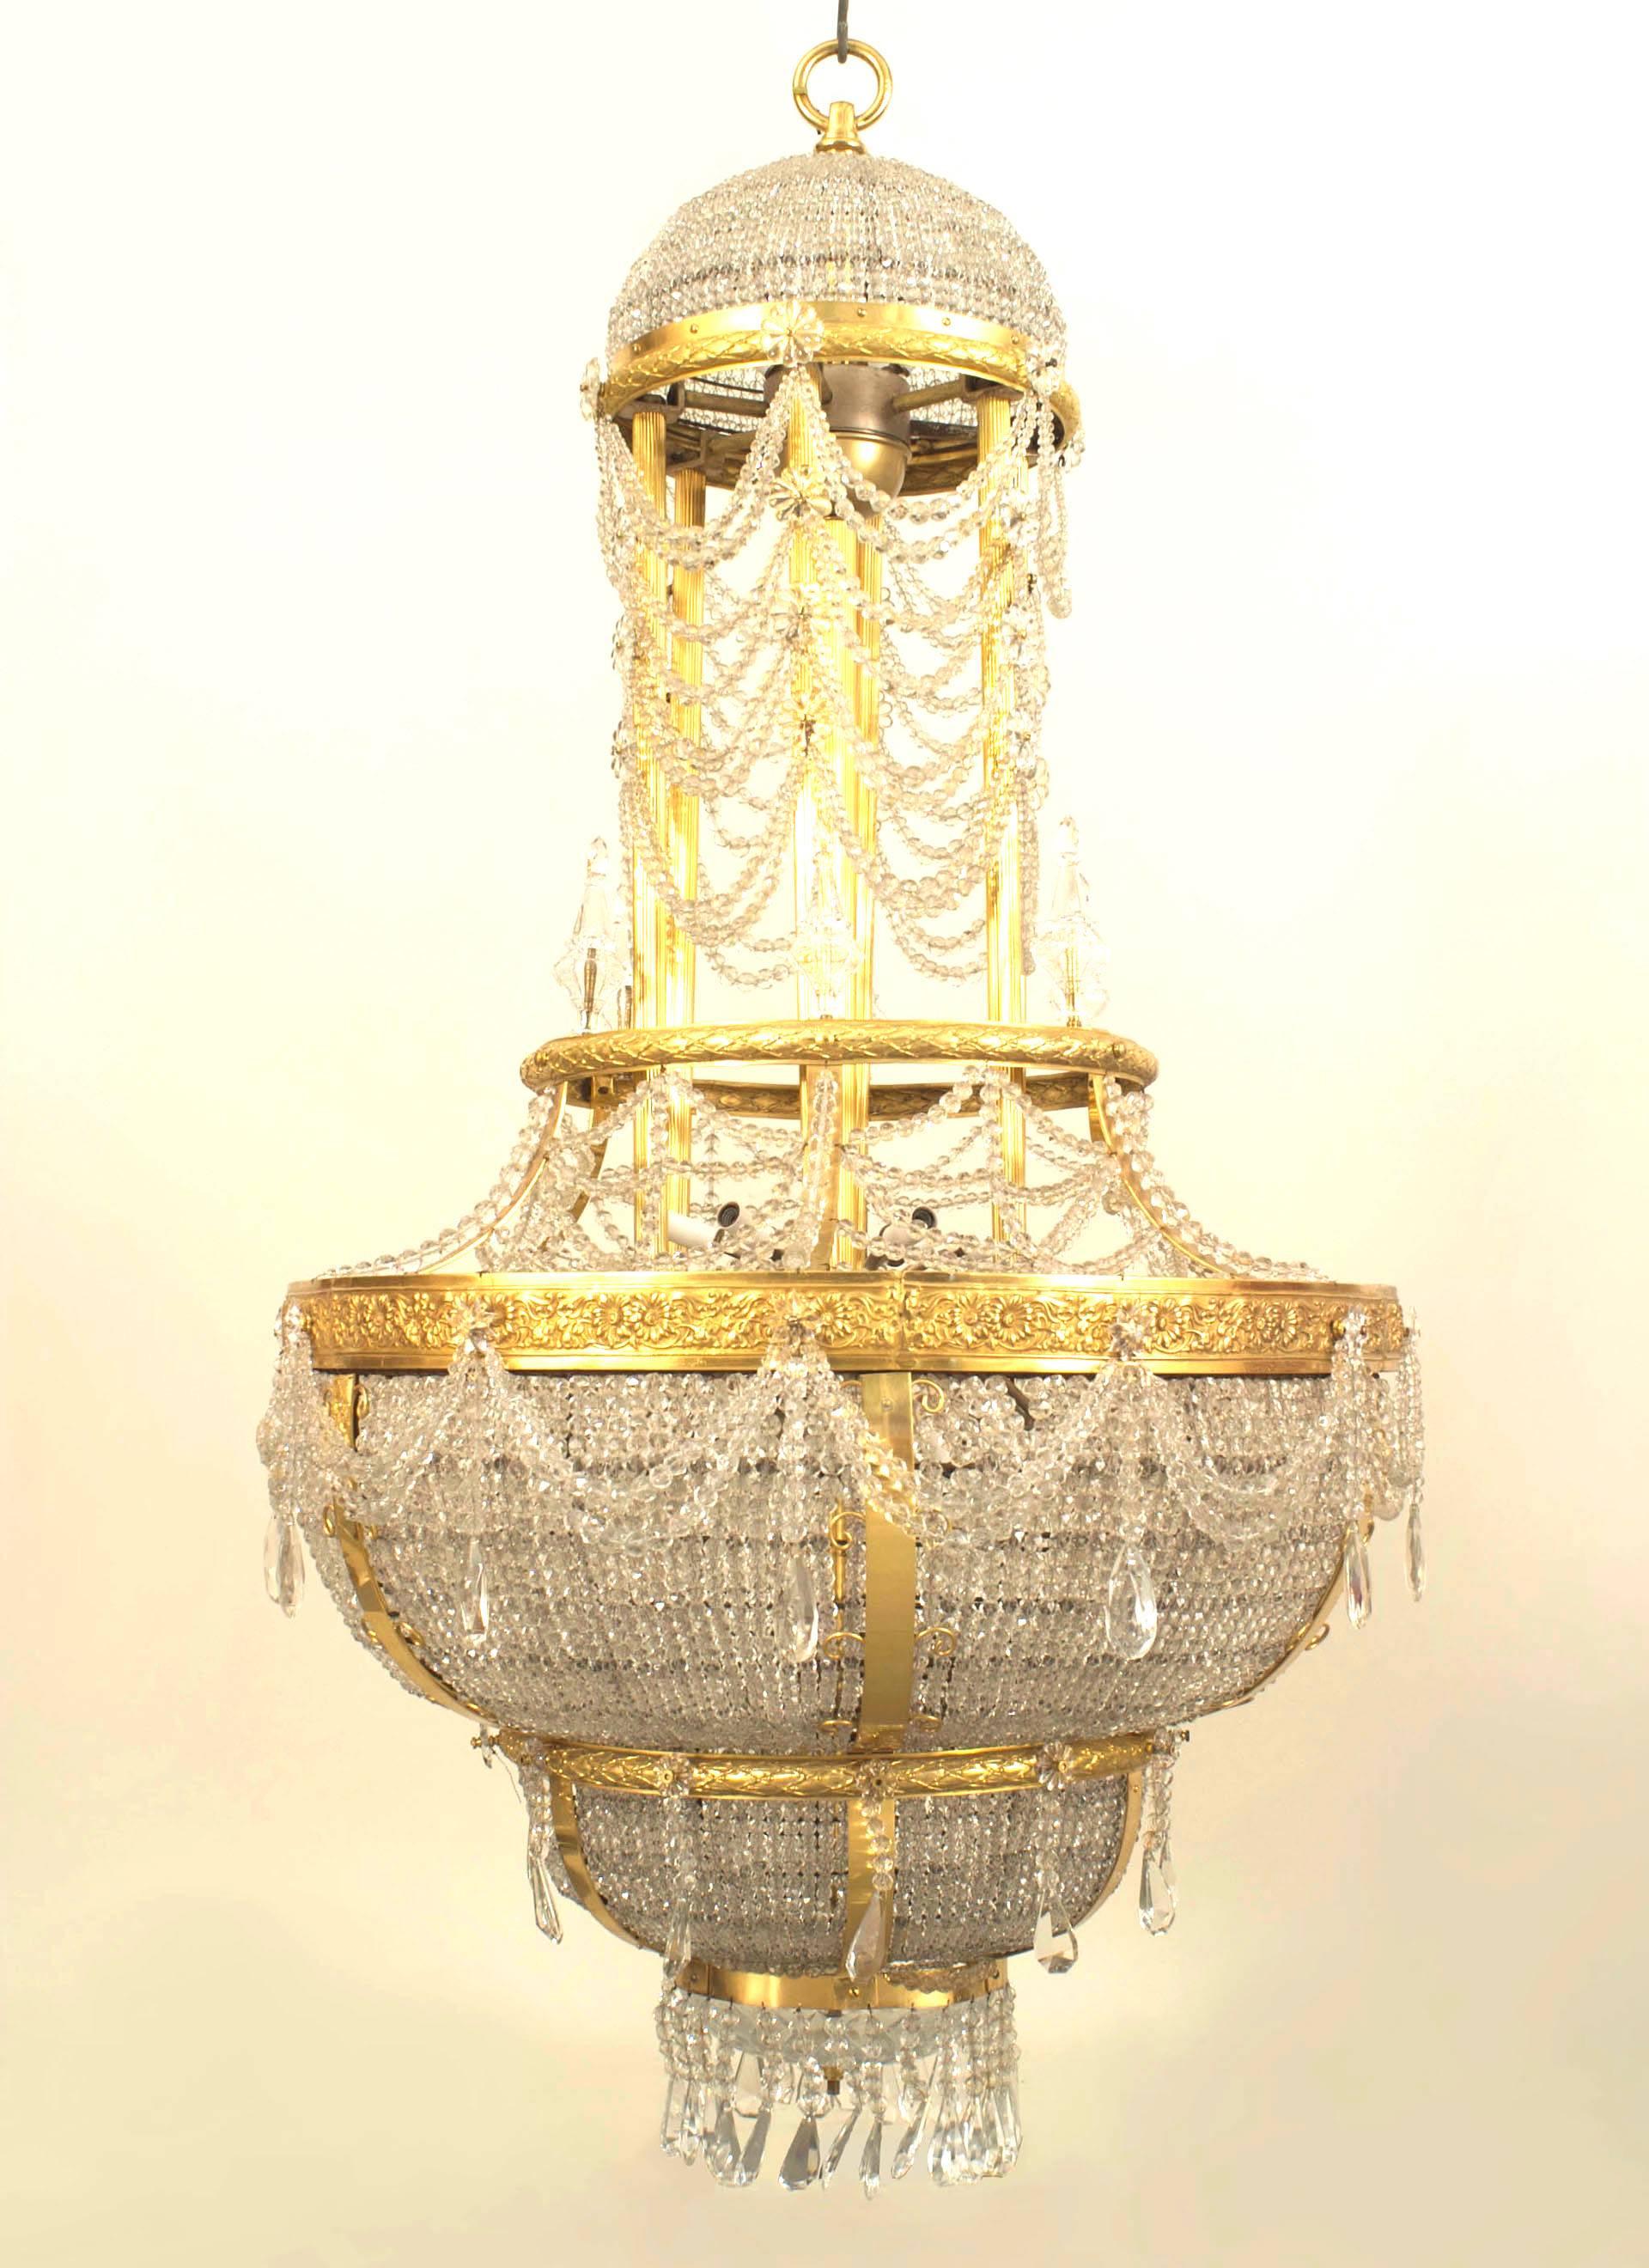 French Louis XVI style (circa 1900) gilt bronze and beaded crystal large
chandelier with a dome form top and swag and festoon design with eight crystal finials.